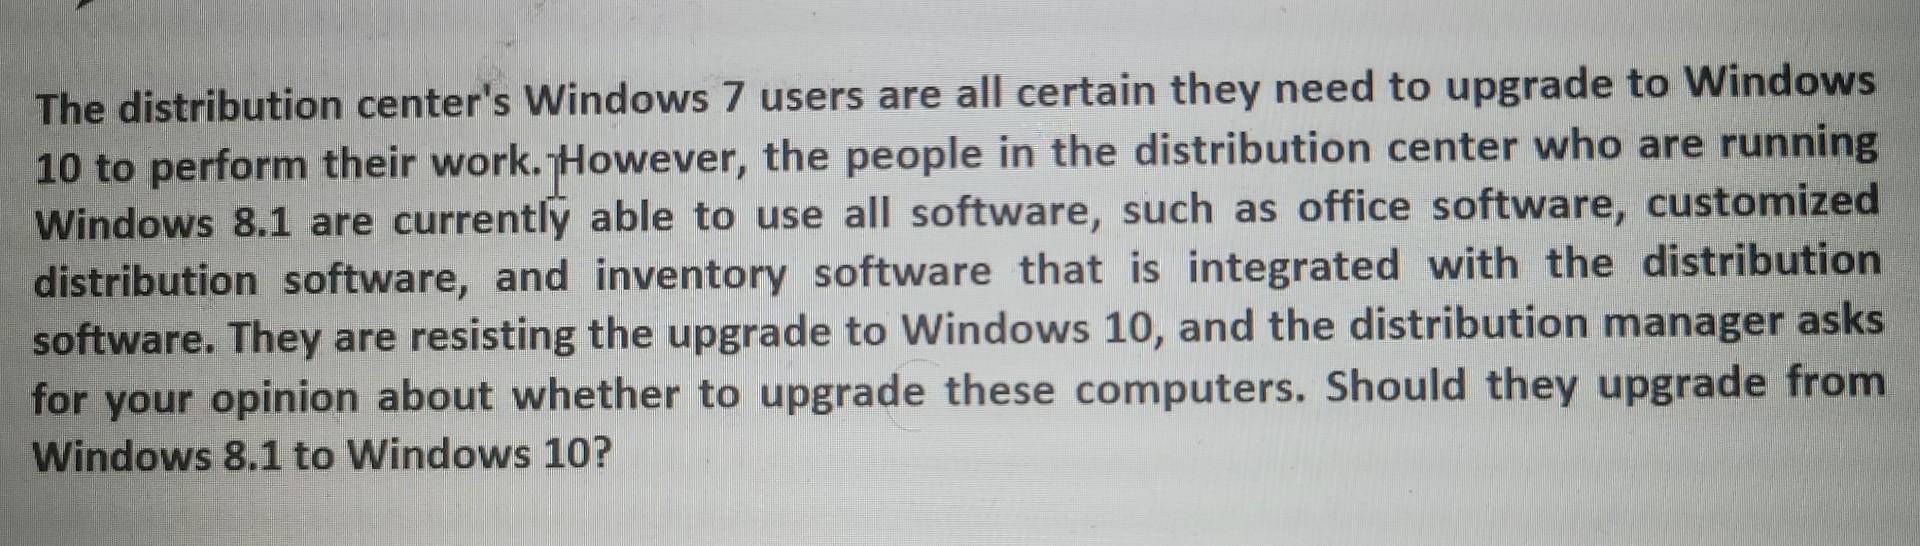 The distribution center's Windows 7 users are all certain they need to upgrade to Windows 10 to perform their